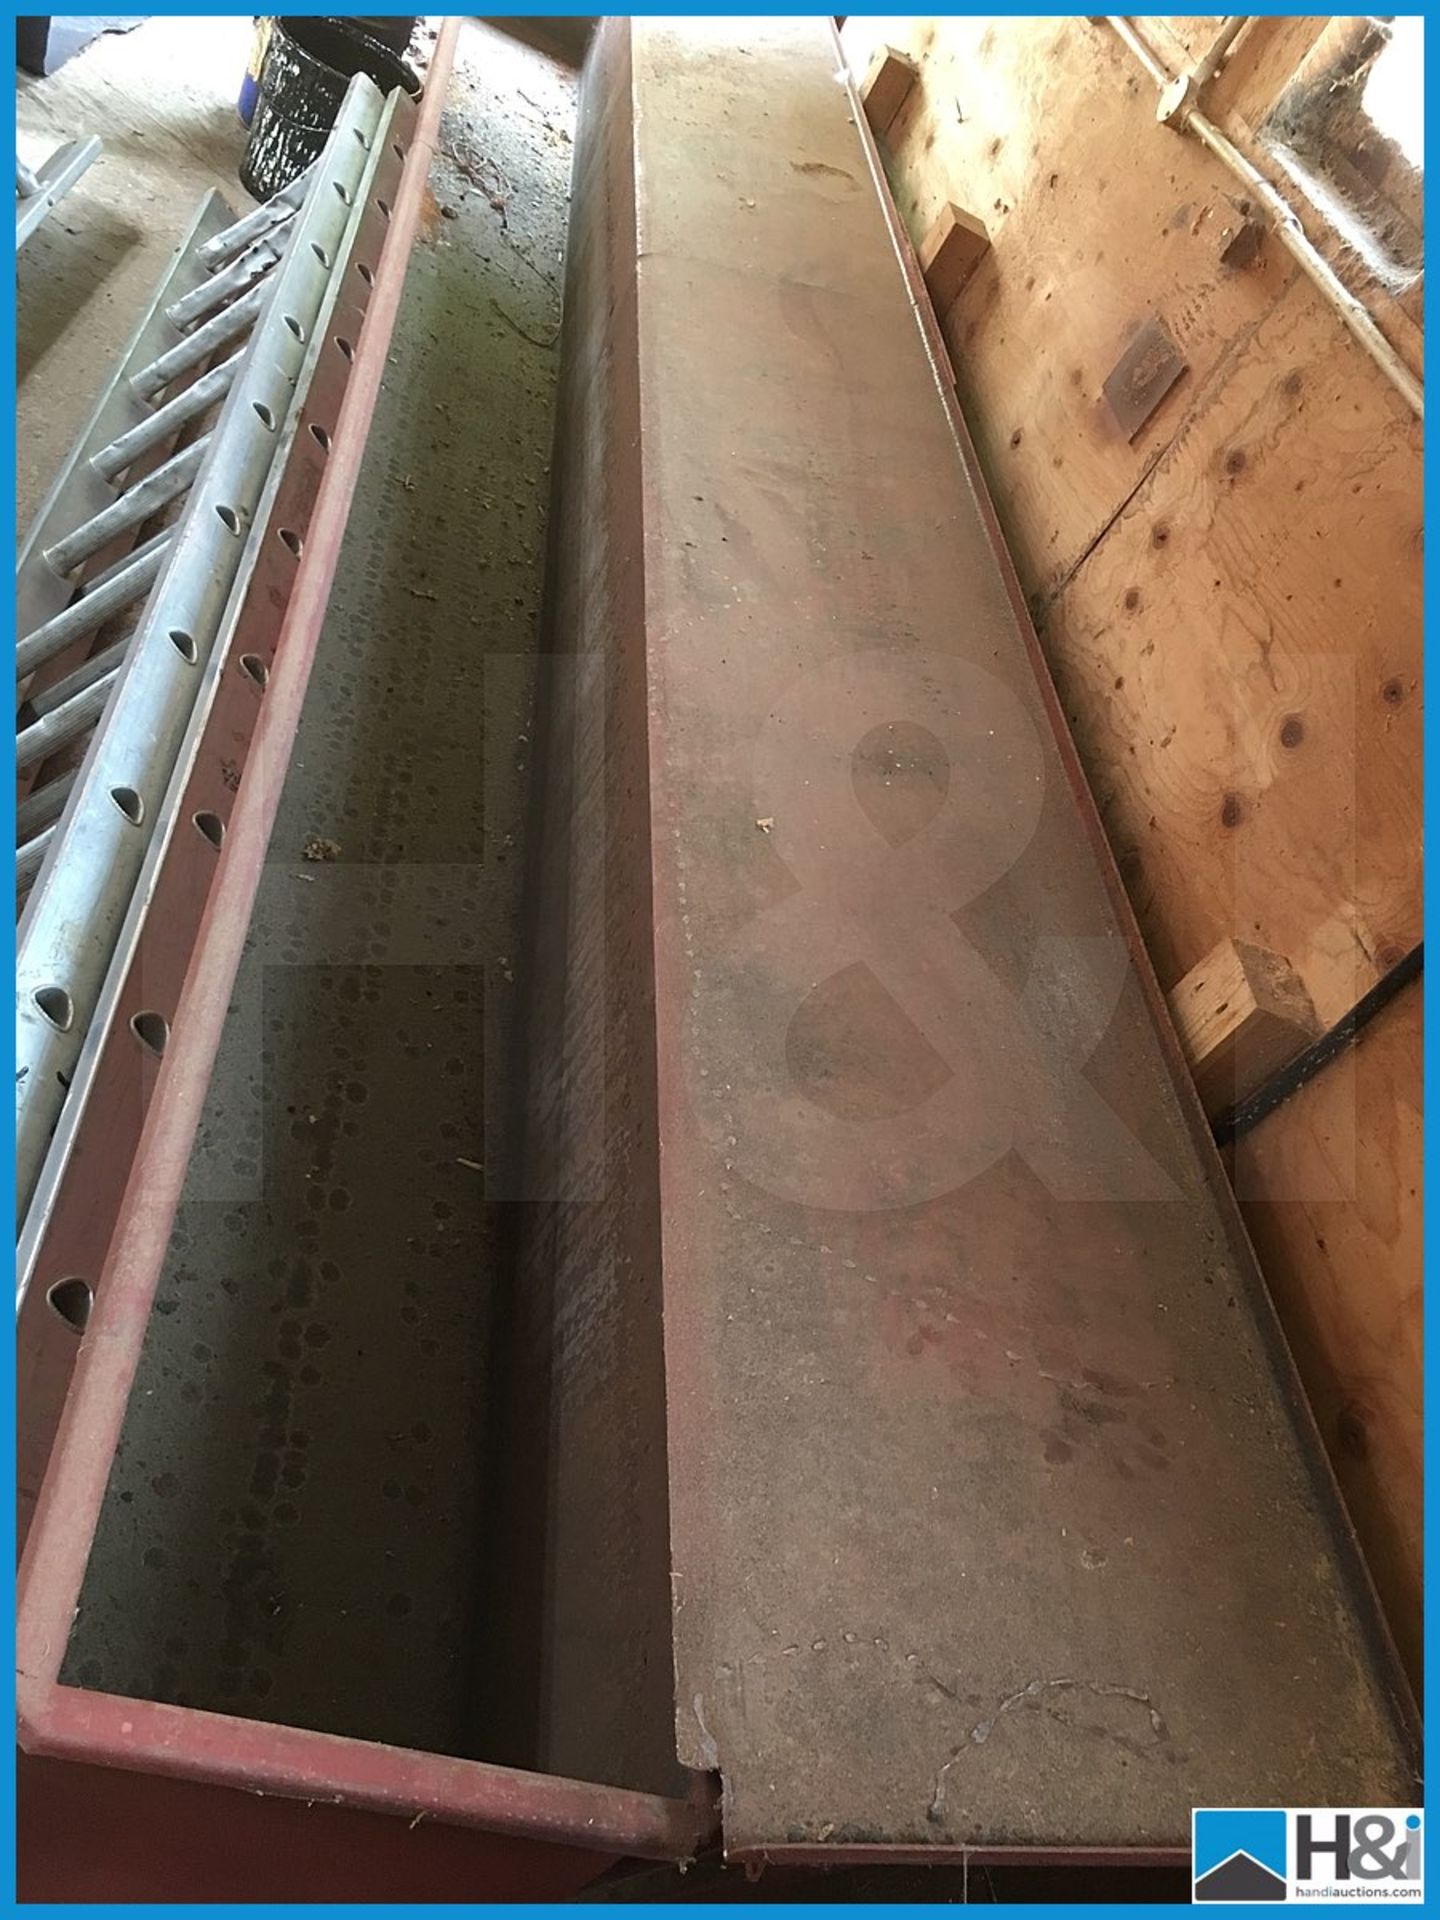 Metal timber treatment dipping tank approx 5m Appraisal: Viewing Essential Serial No: NA Location: